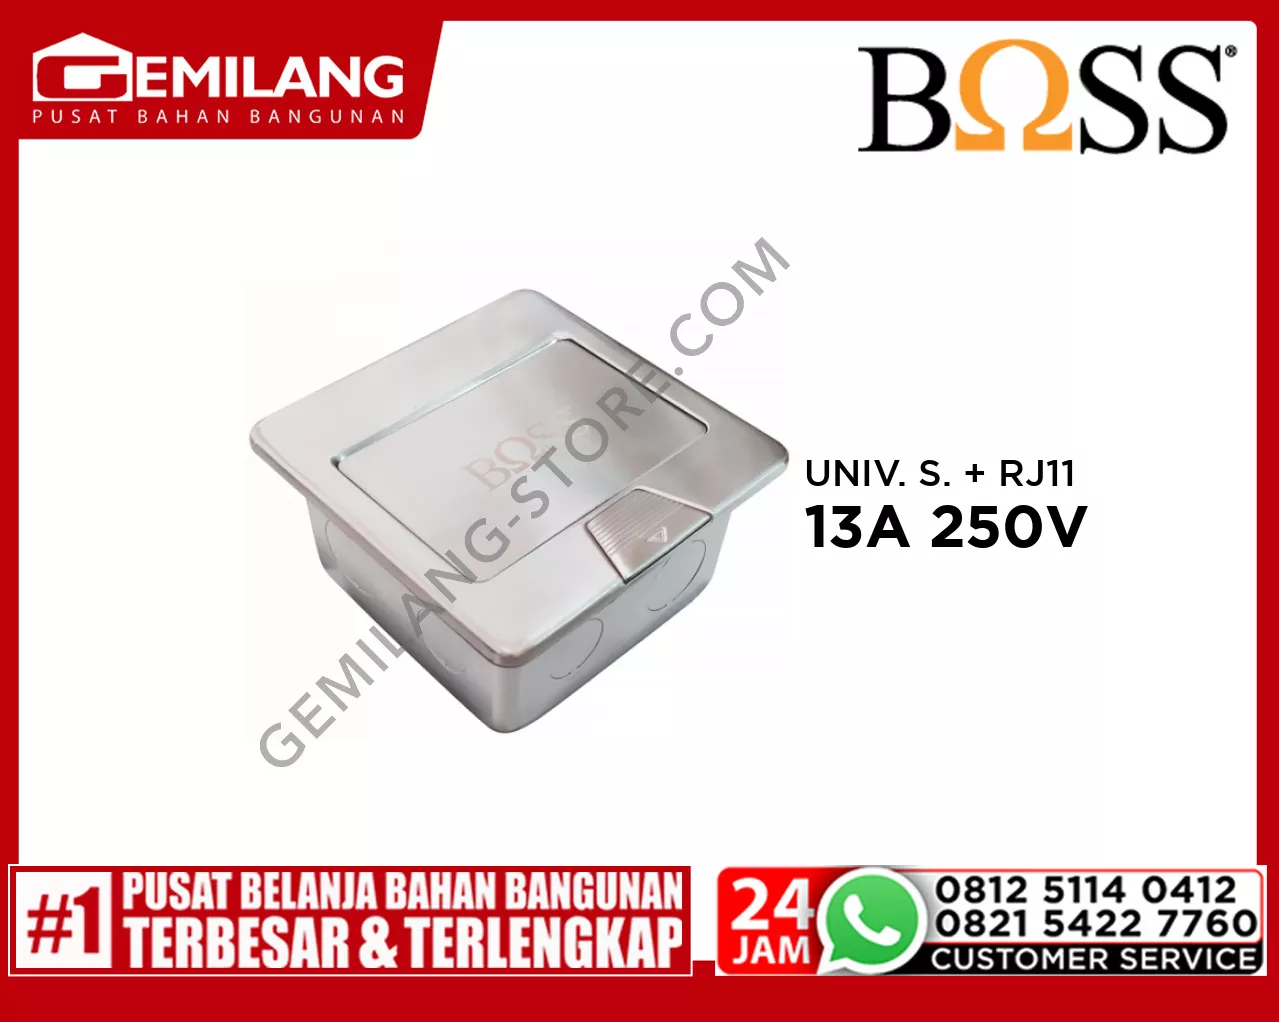 BOSS UNIVERSAL SOCKET + RJ11 CAT3 4 CONTACT TLPN OUTLET 13A 250V BF0426/10IS-RJ